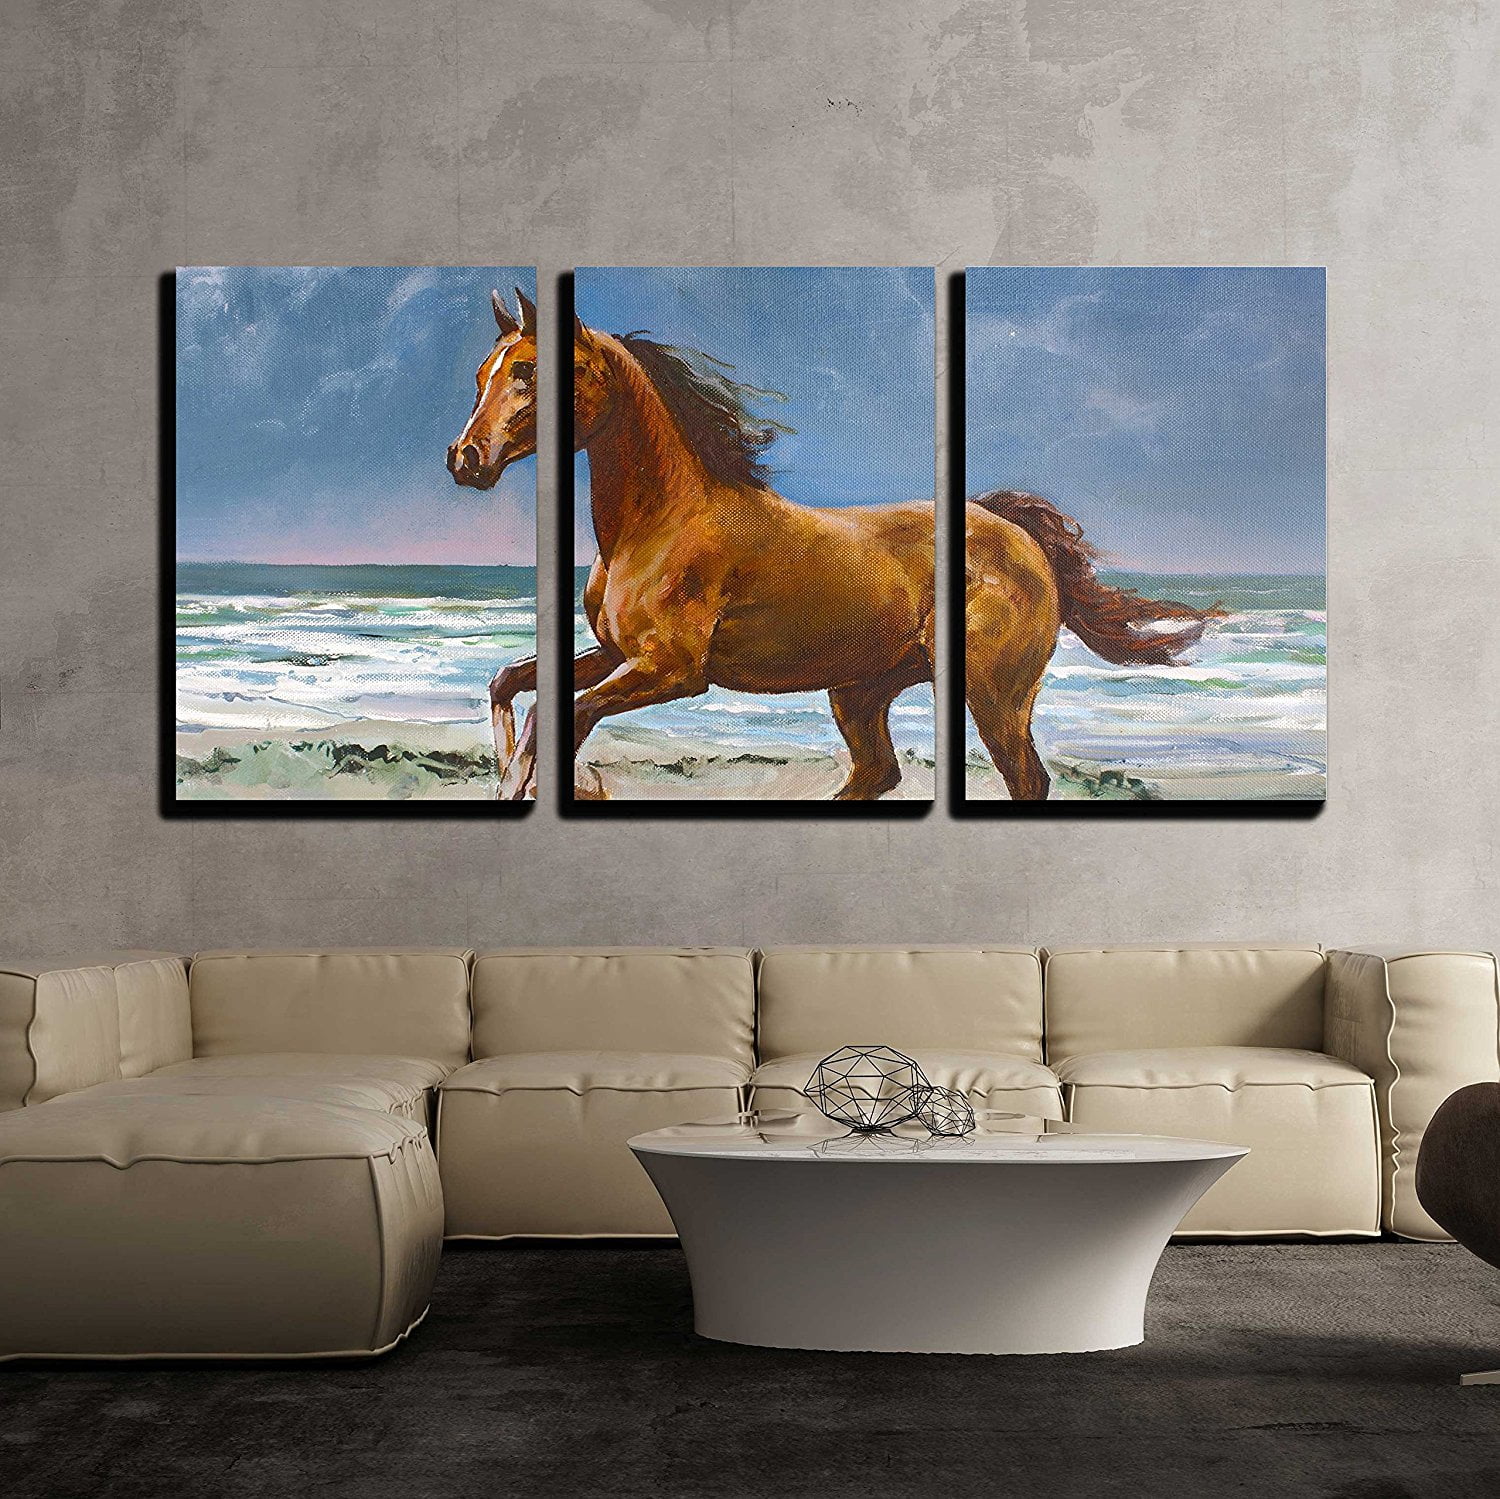 Art Poster Canvas Horse Gallop Animal Picture Bedroom Wall Kid Home Decor Gifts